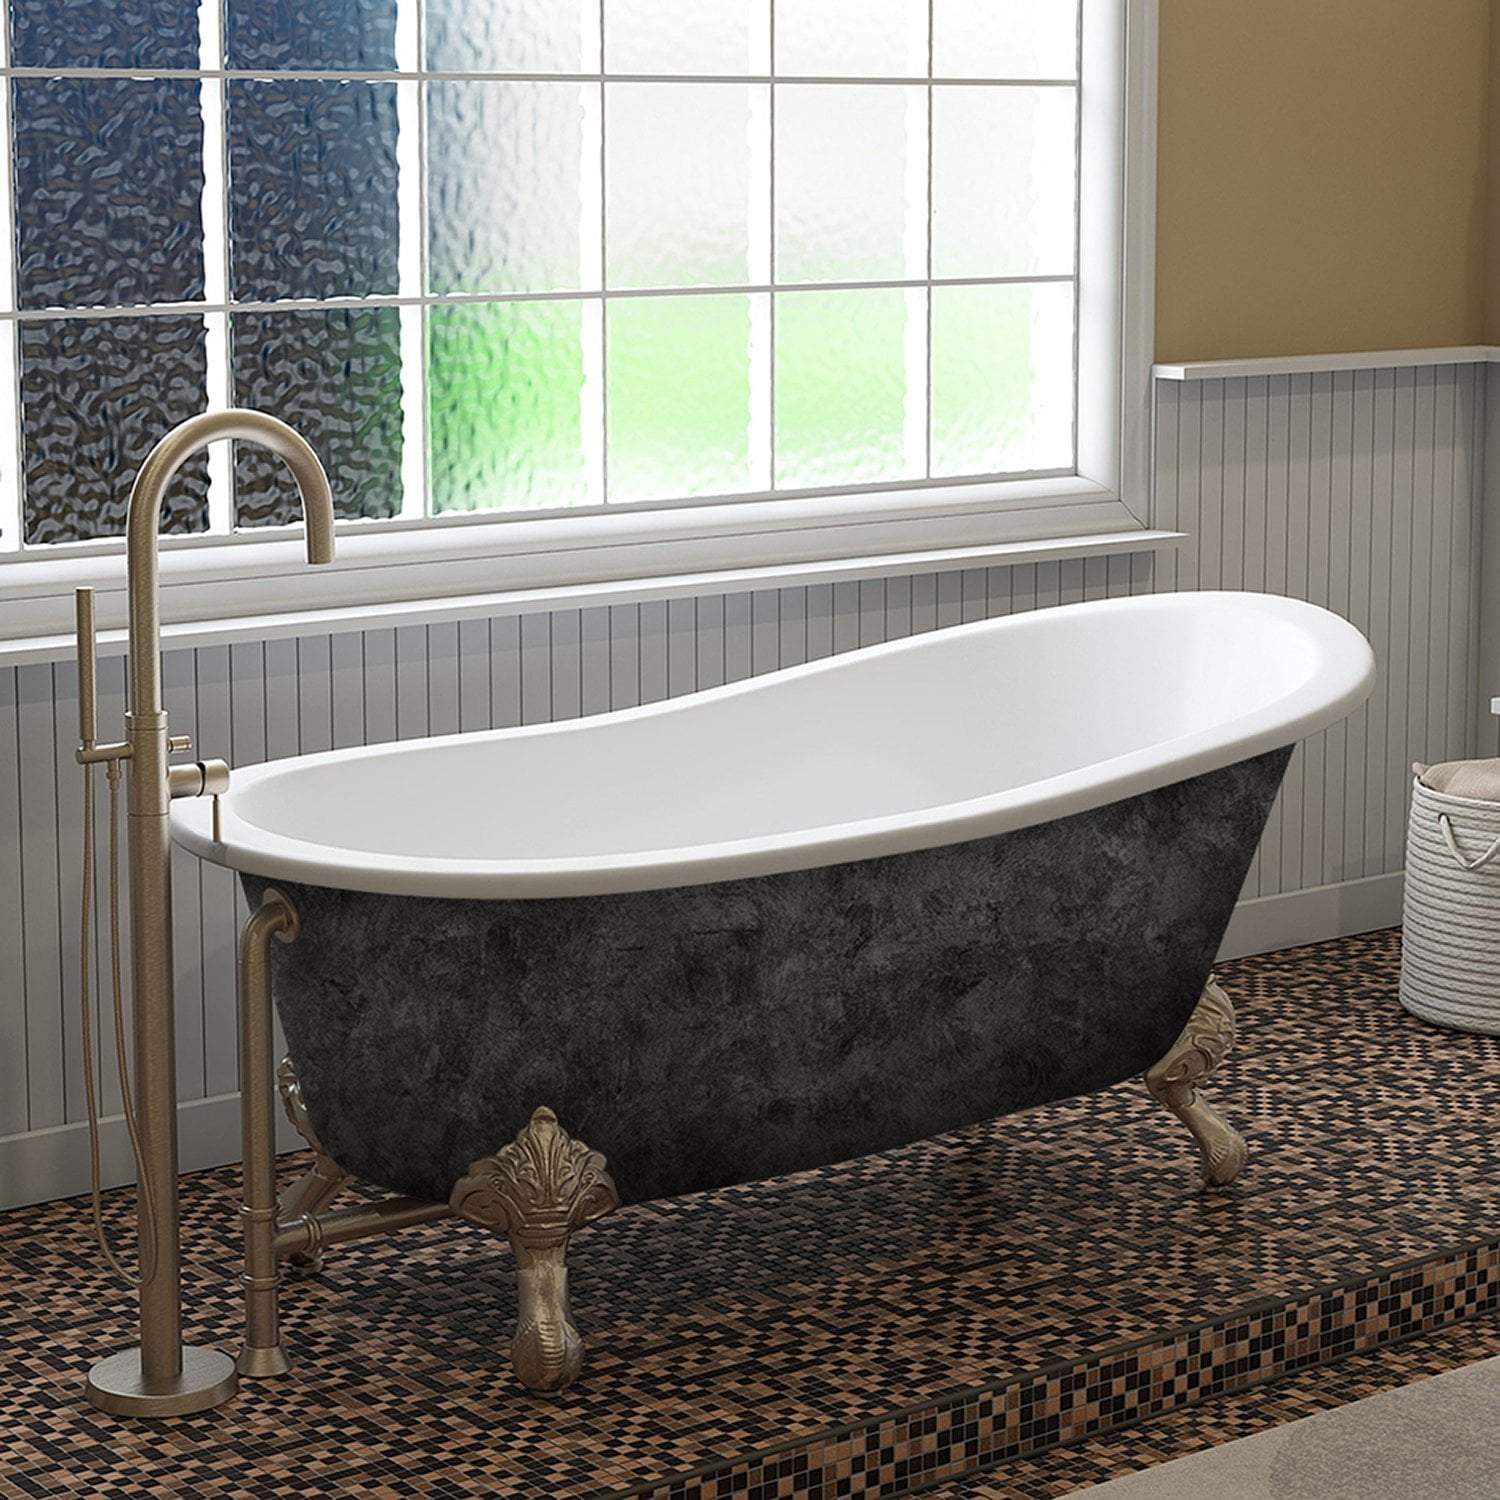 Scorched Platinum 67” x 30” Cast Iron Slipper Bathtub with” No Faucet Holes and Brushed Nickel Ball and Claw Feet